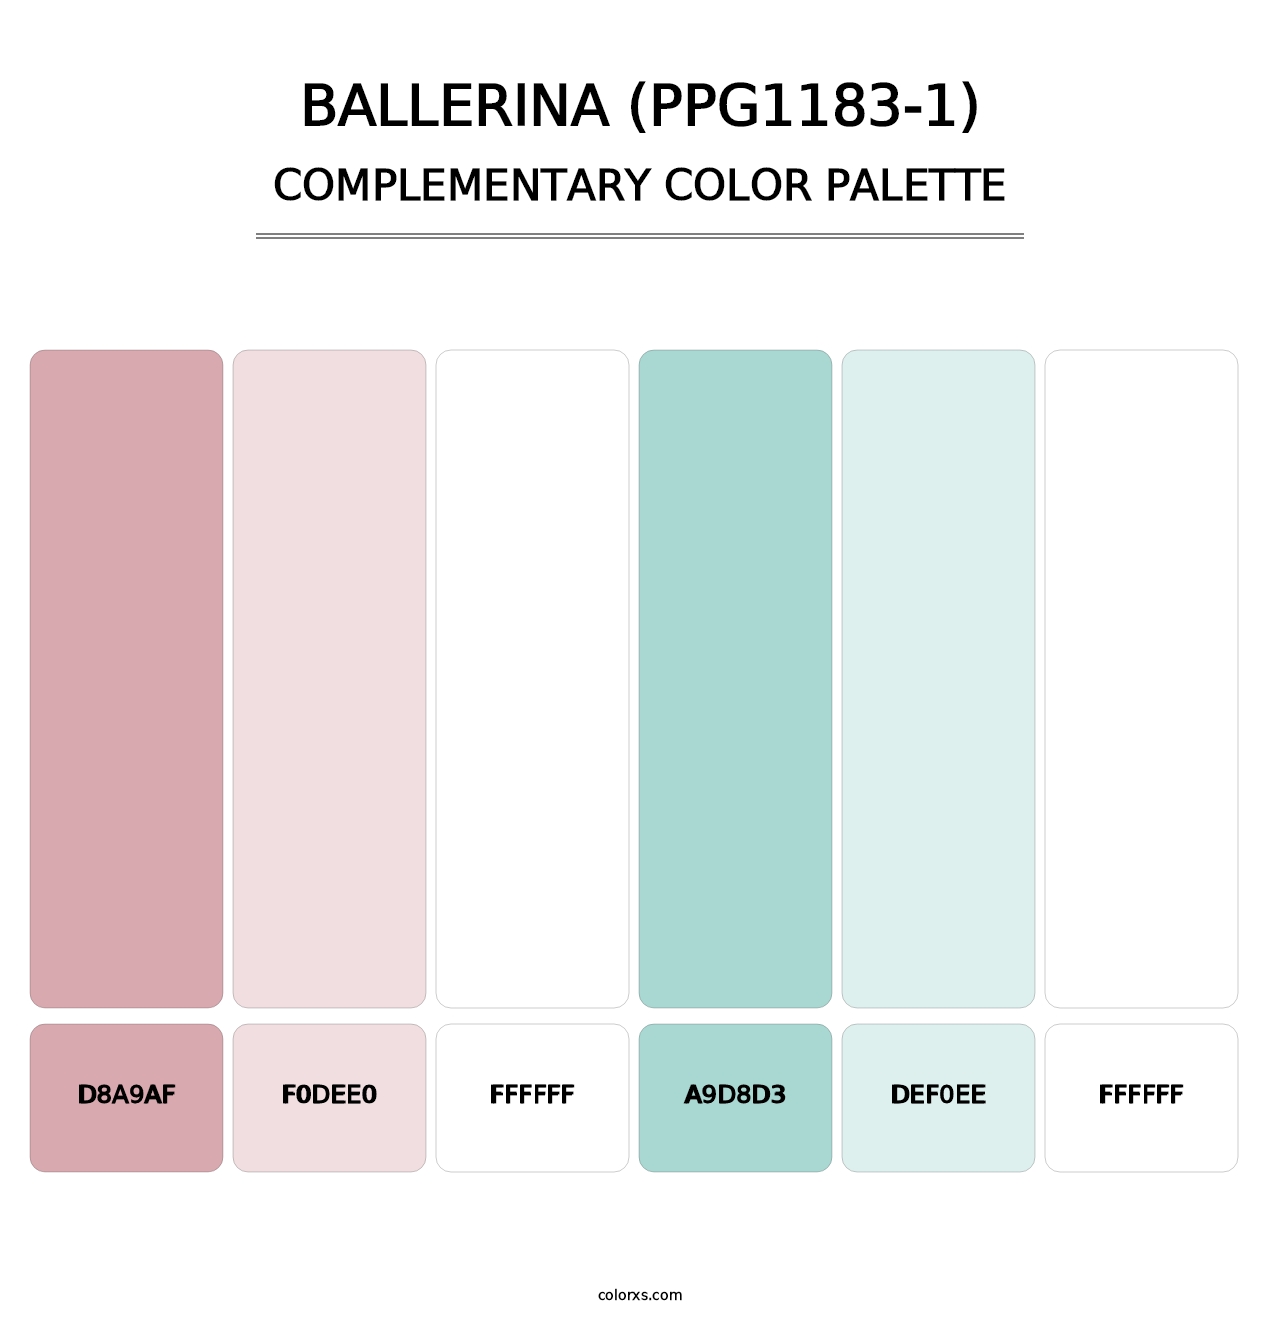 Ballerina (PPG1183-1) - Complementary Color Palette